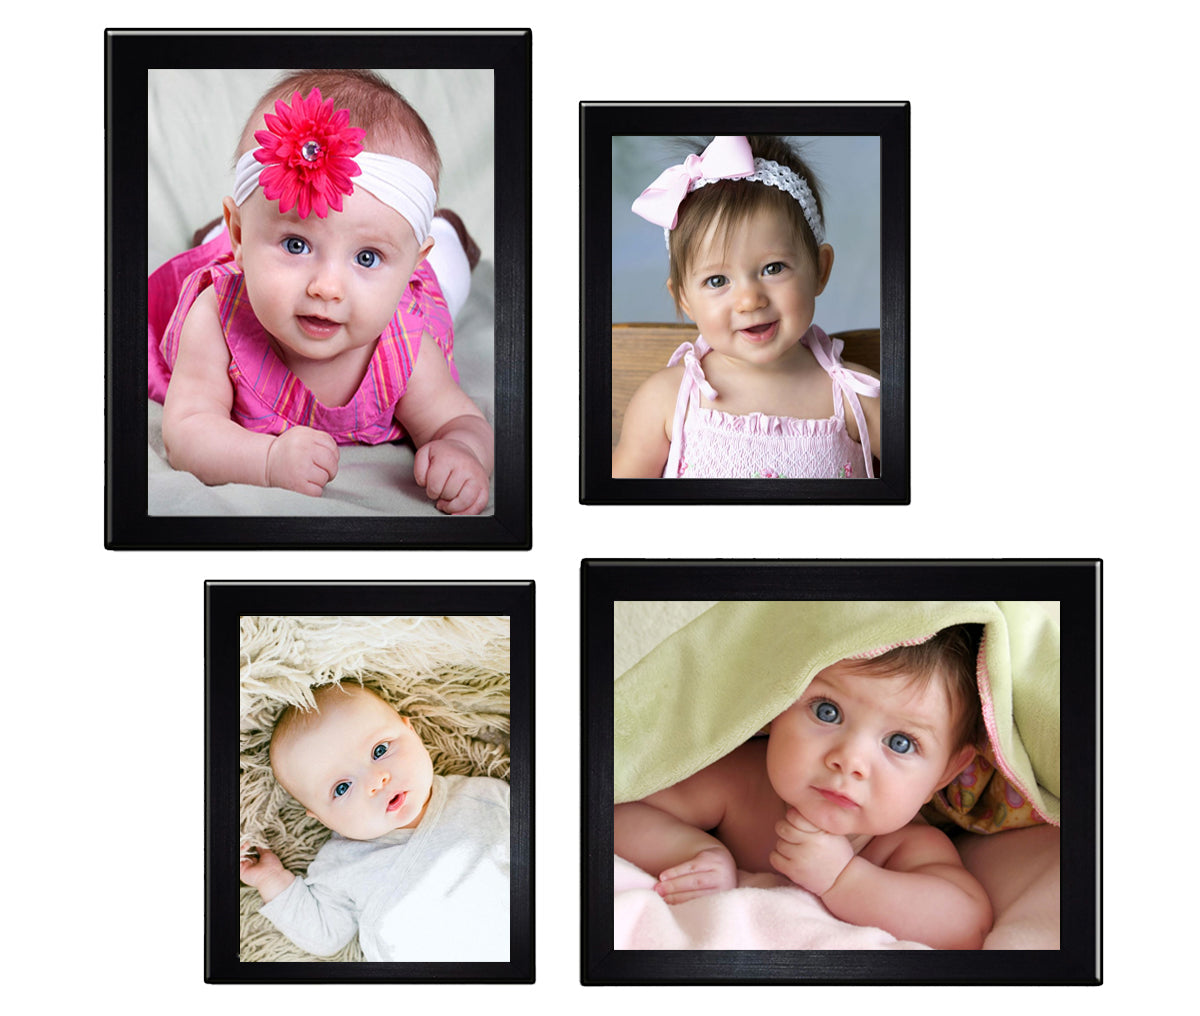 Capture and Cherish Set of 4 Black Color Photo Frames with Personalized Pics